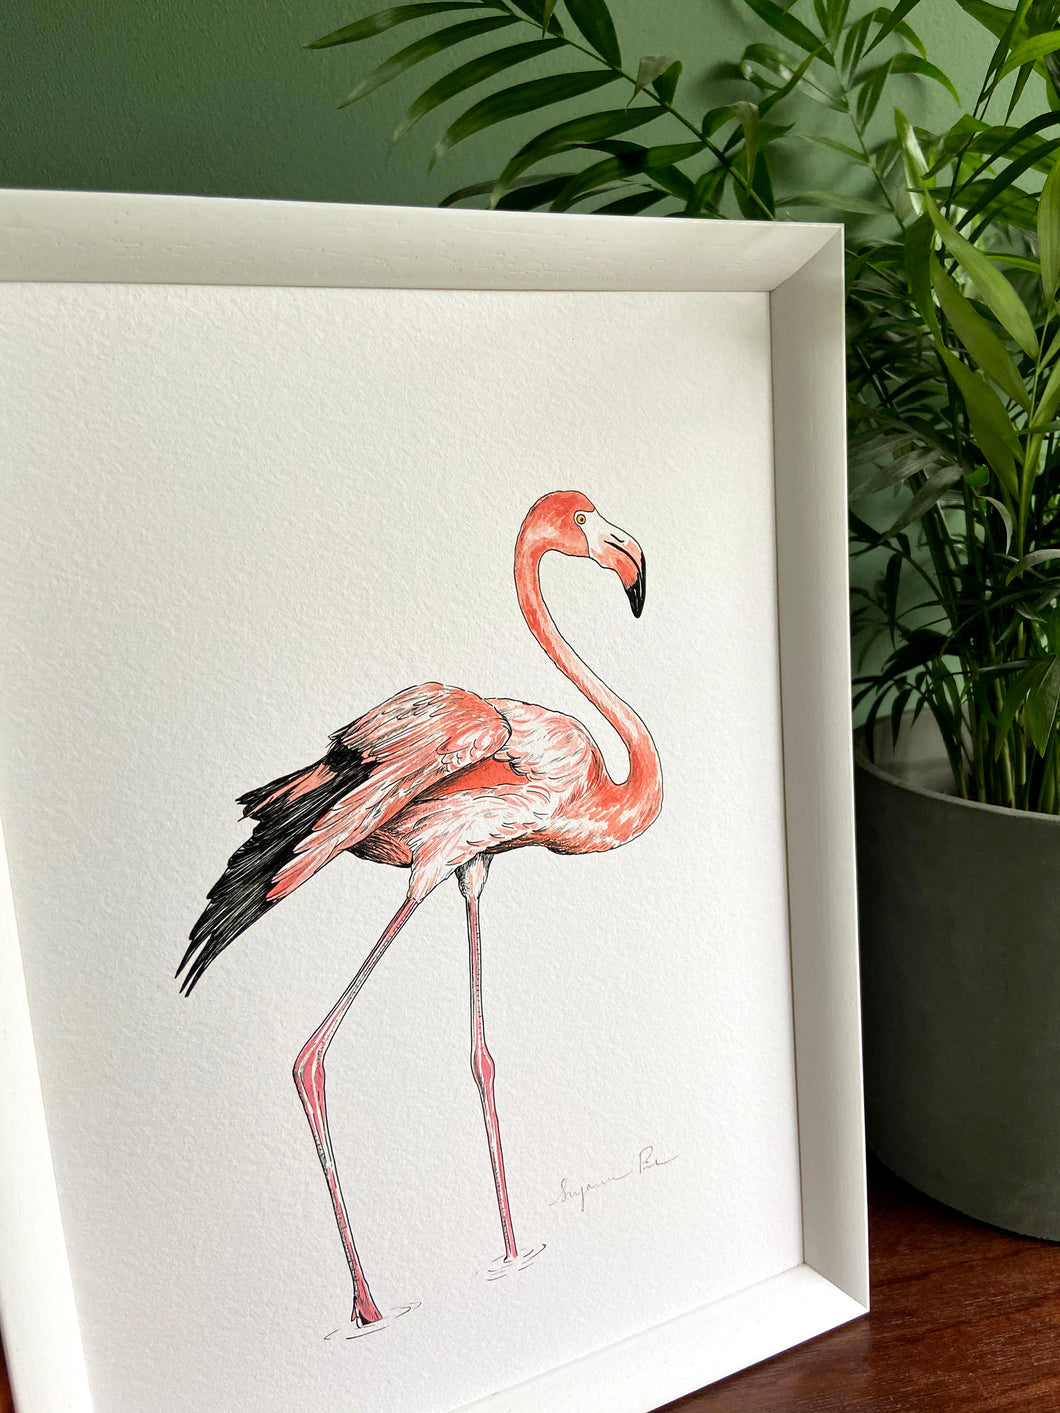 Flamingo giclée print with handpainted watercolour plumage, in a white frame, standing on a wooden surface. Green wall behind. Pot plant standing next to it.